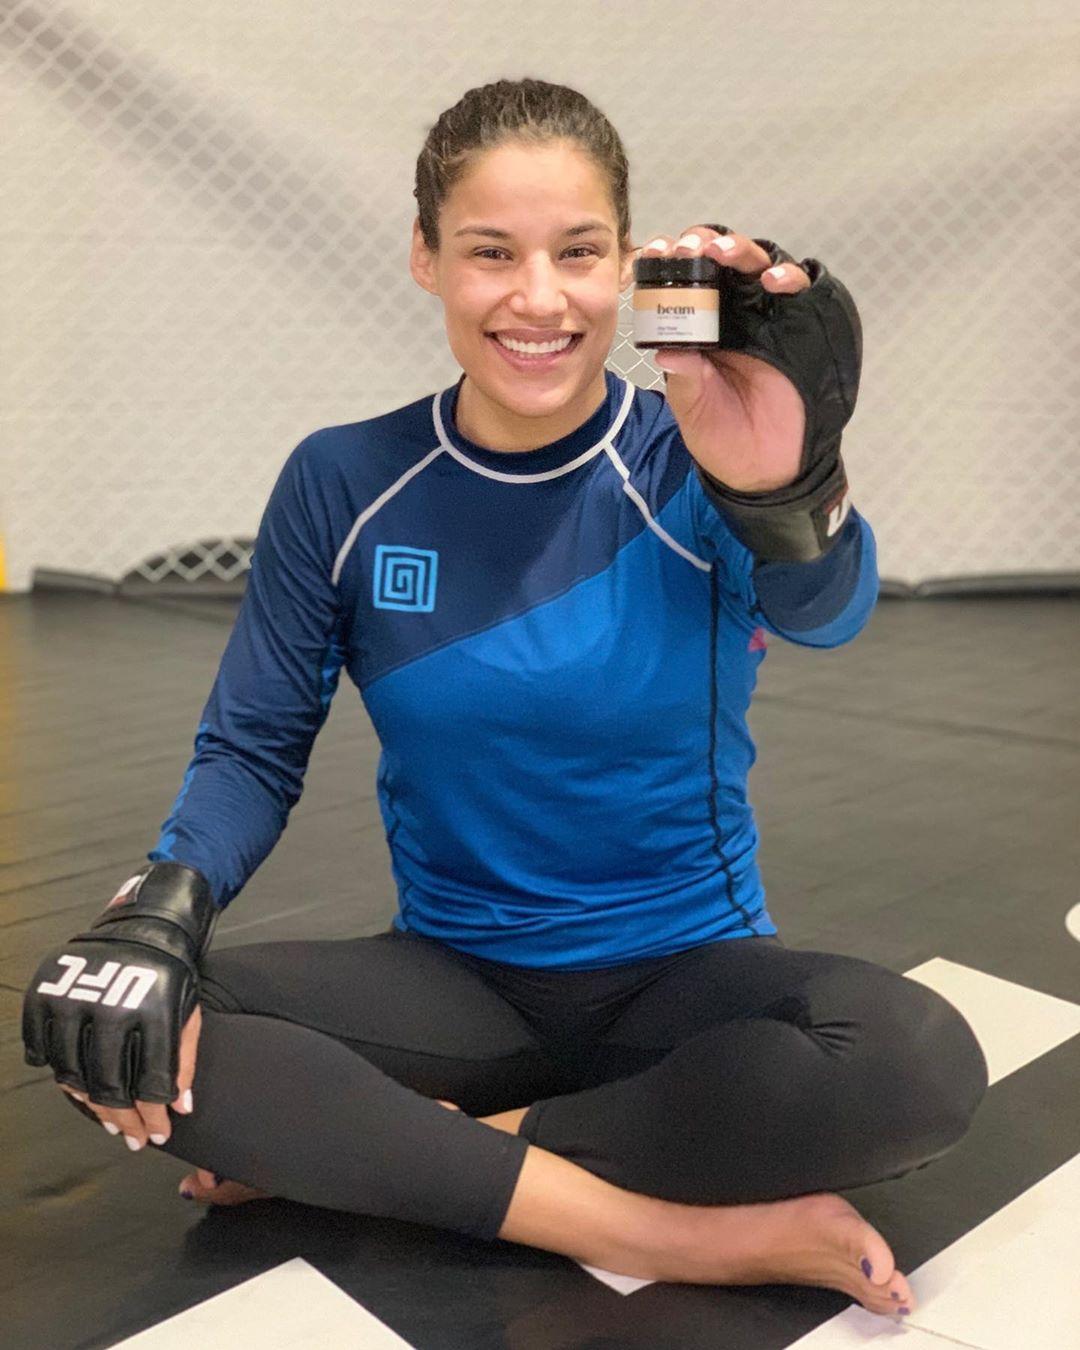 Top 51 Hot Pictures Of Julianna Pena Which Will Make You Succumb To Her 5